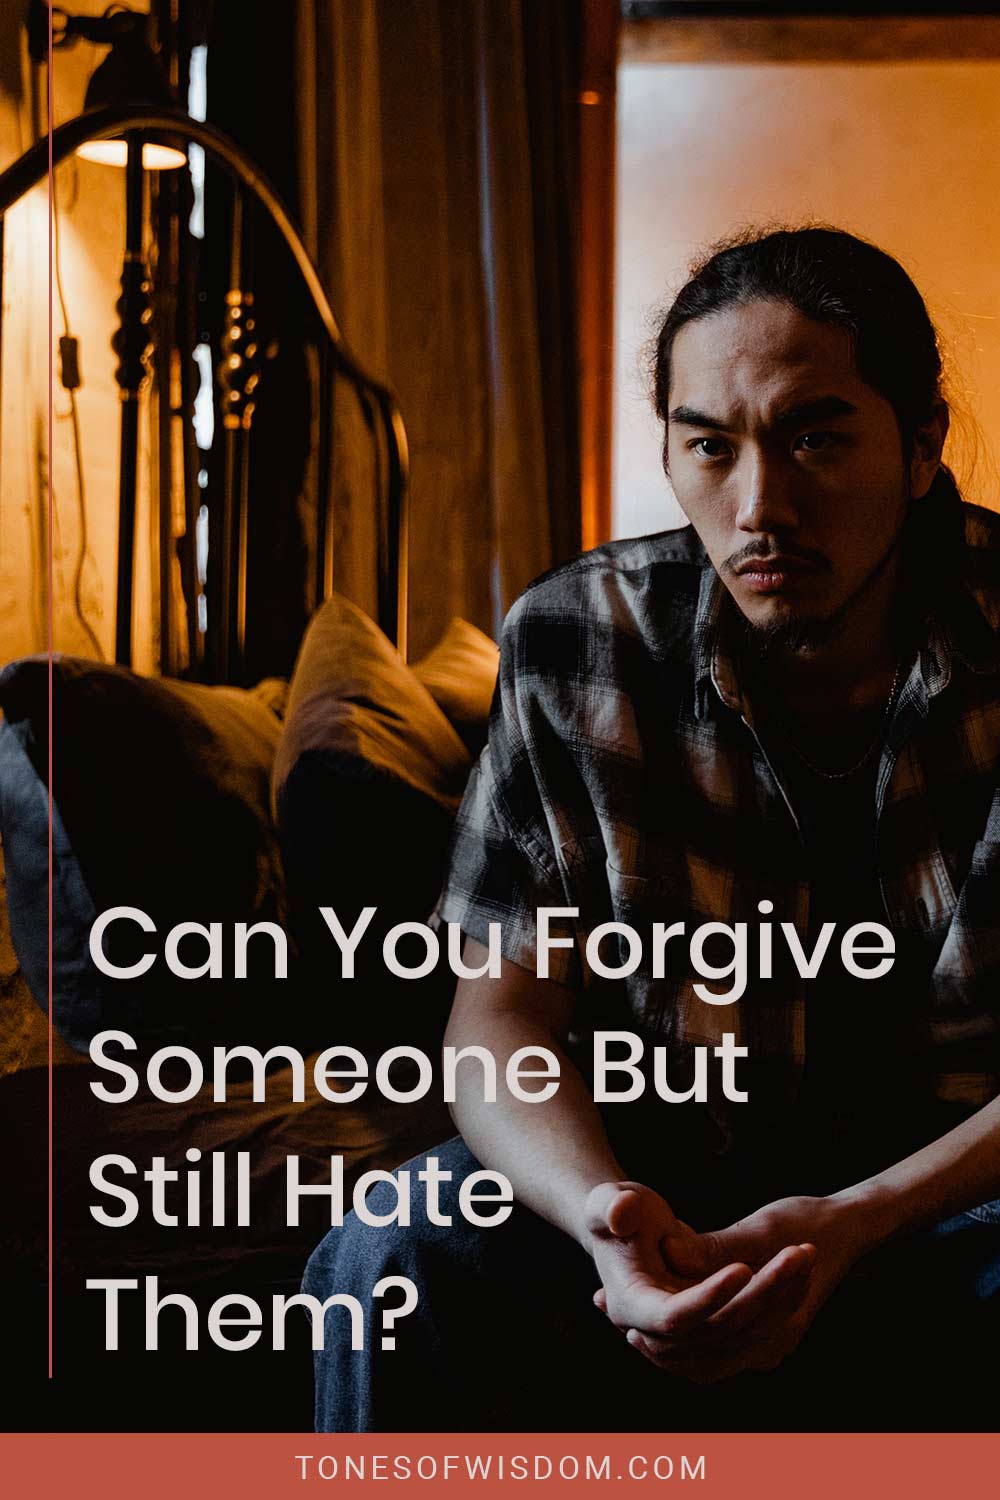 Can You Forgive Someone But Still Hate Them?